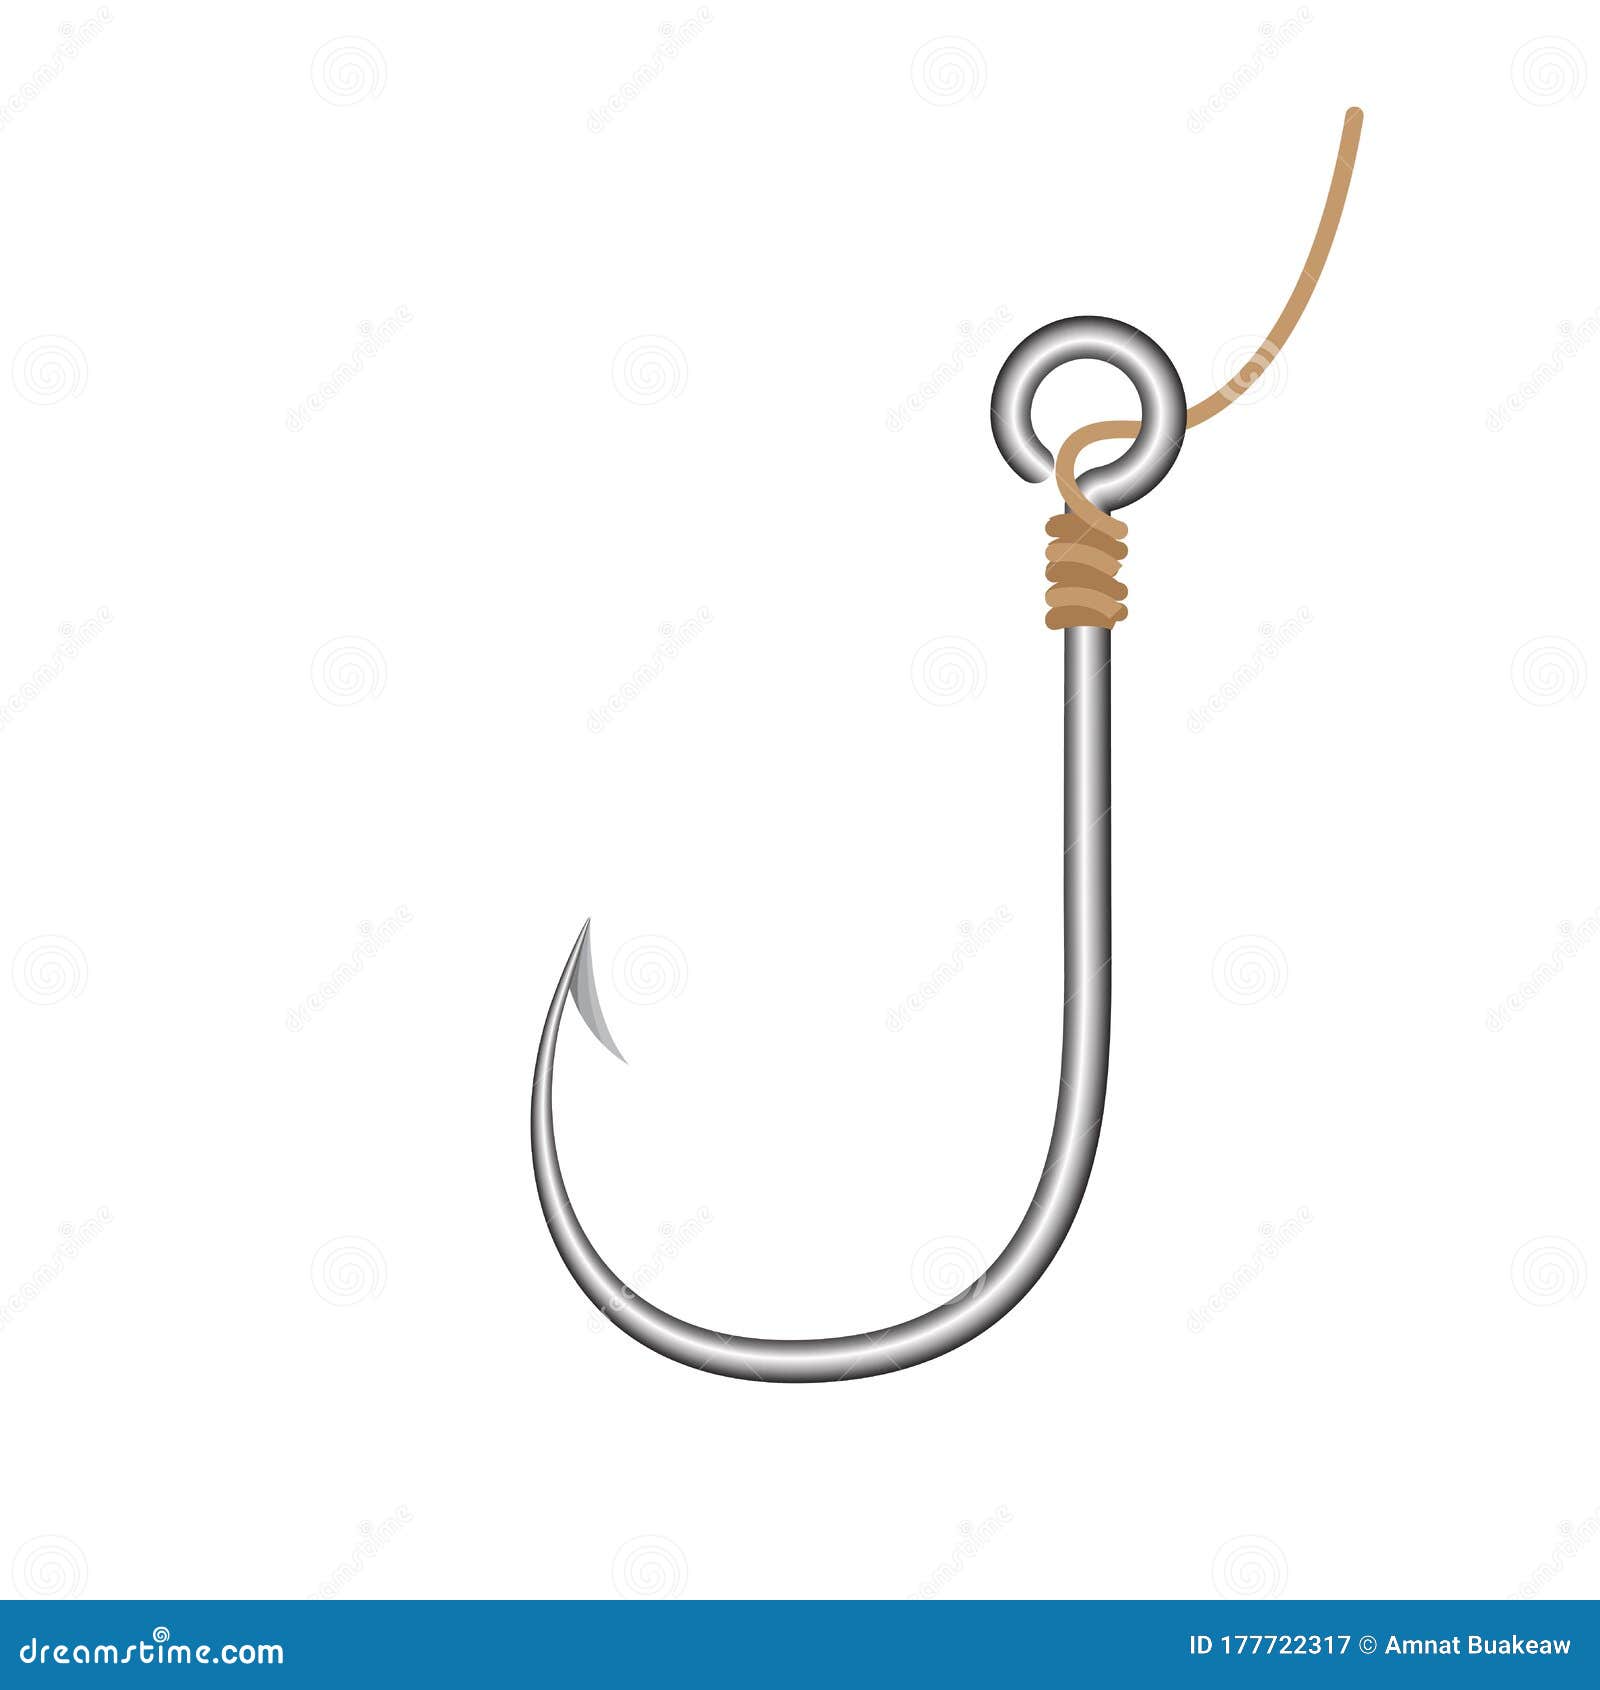 Fishing Hook Isolated on White Background, Icon Fishing Hook, Clip Art  Empty Fishing Hook Trap, Tackle Hook Hang for Fishing Sport Stock Vector -  Illustration of hook, gear: 177722317